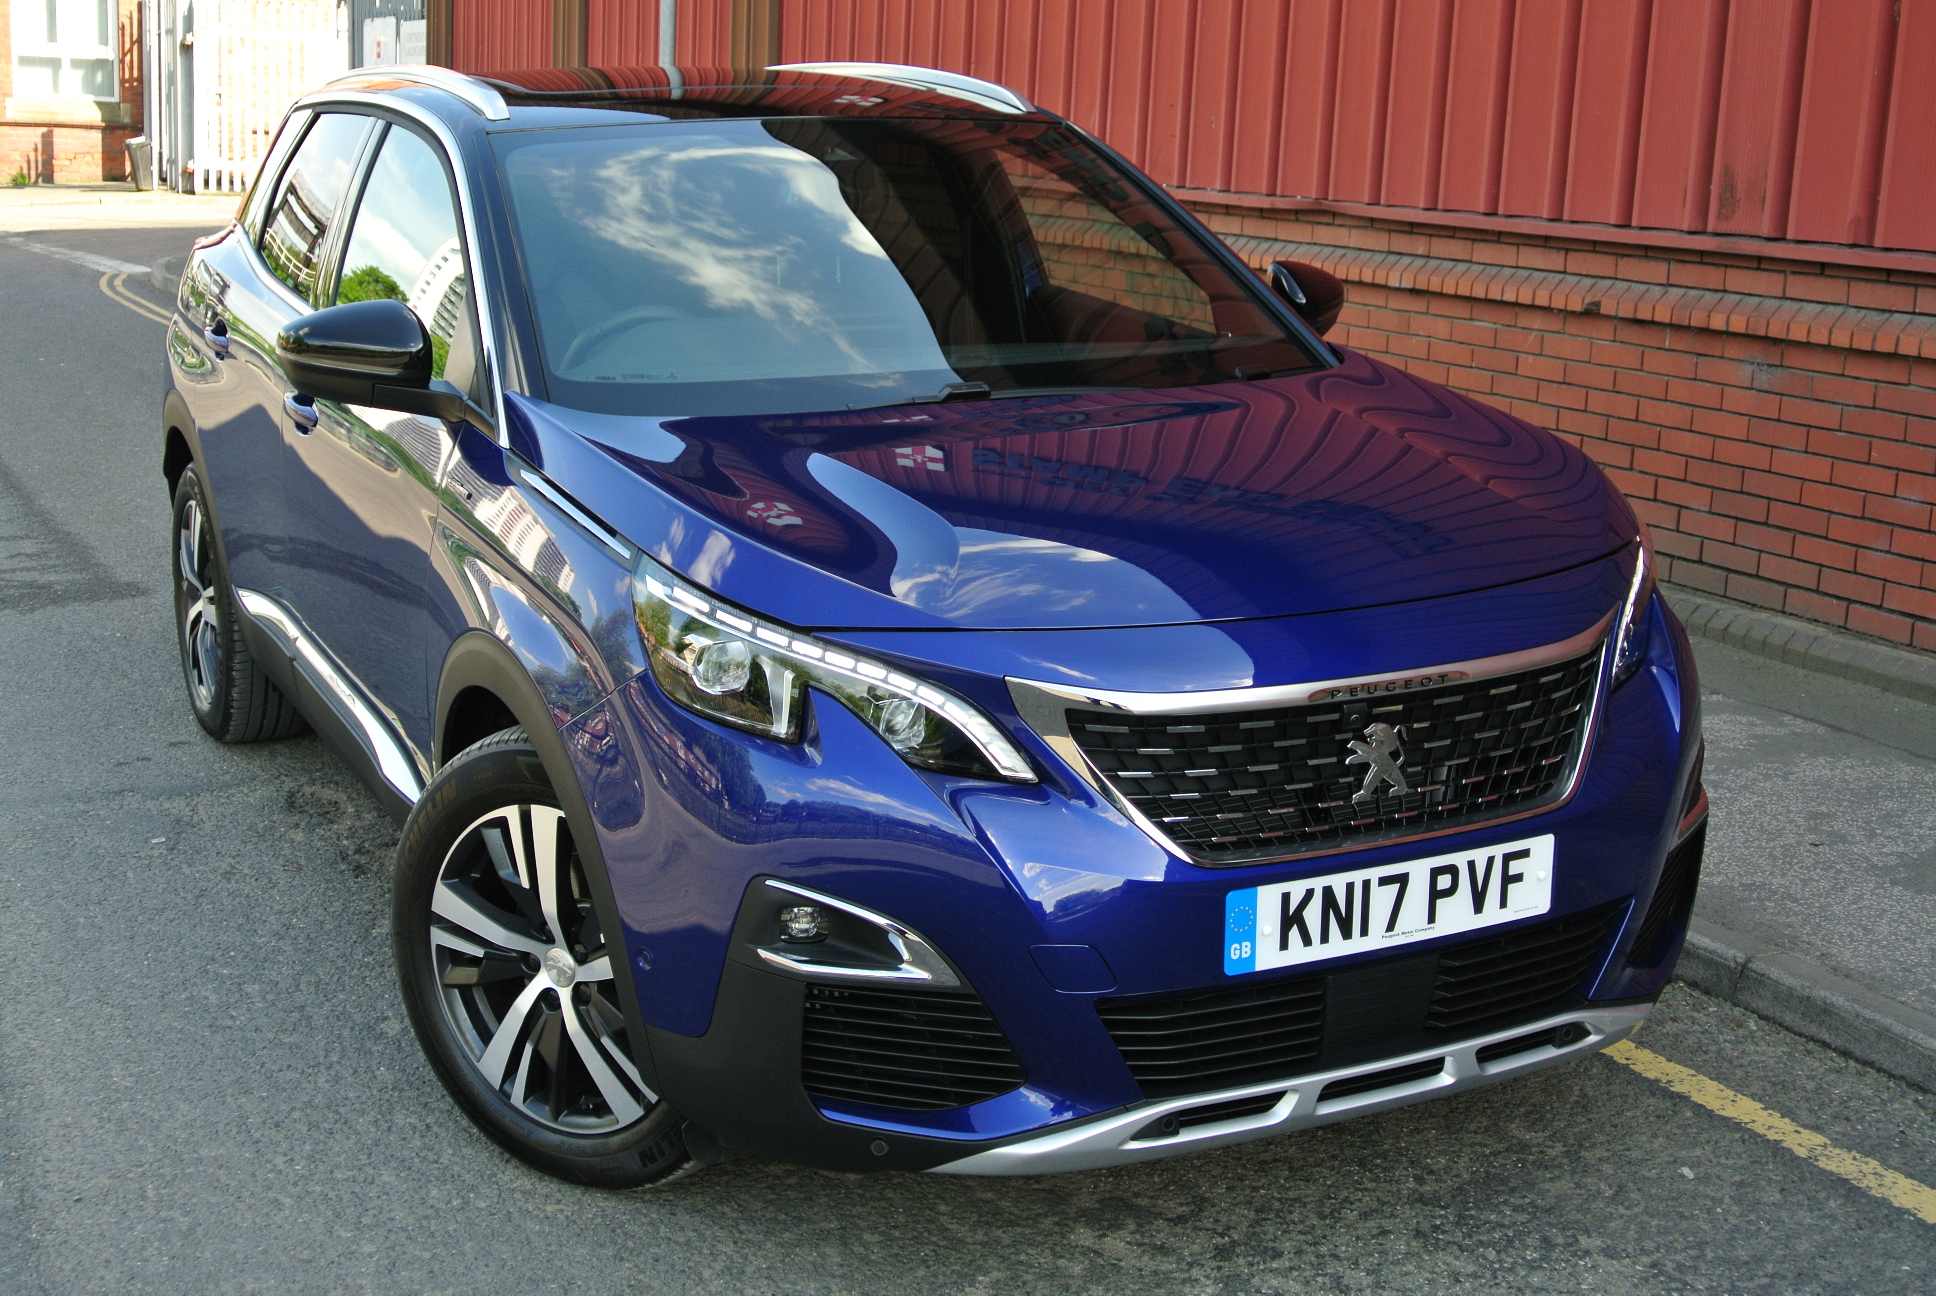 Latest 3008 is a prime number for Peugeot